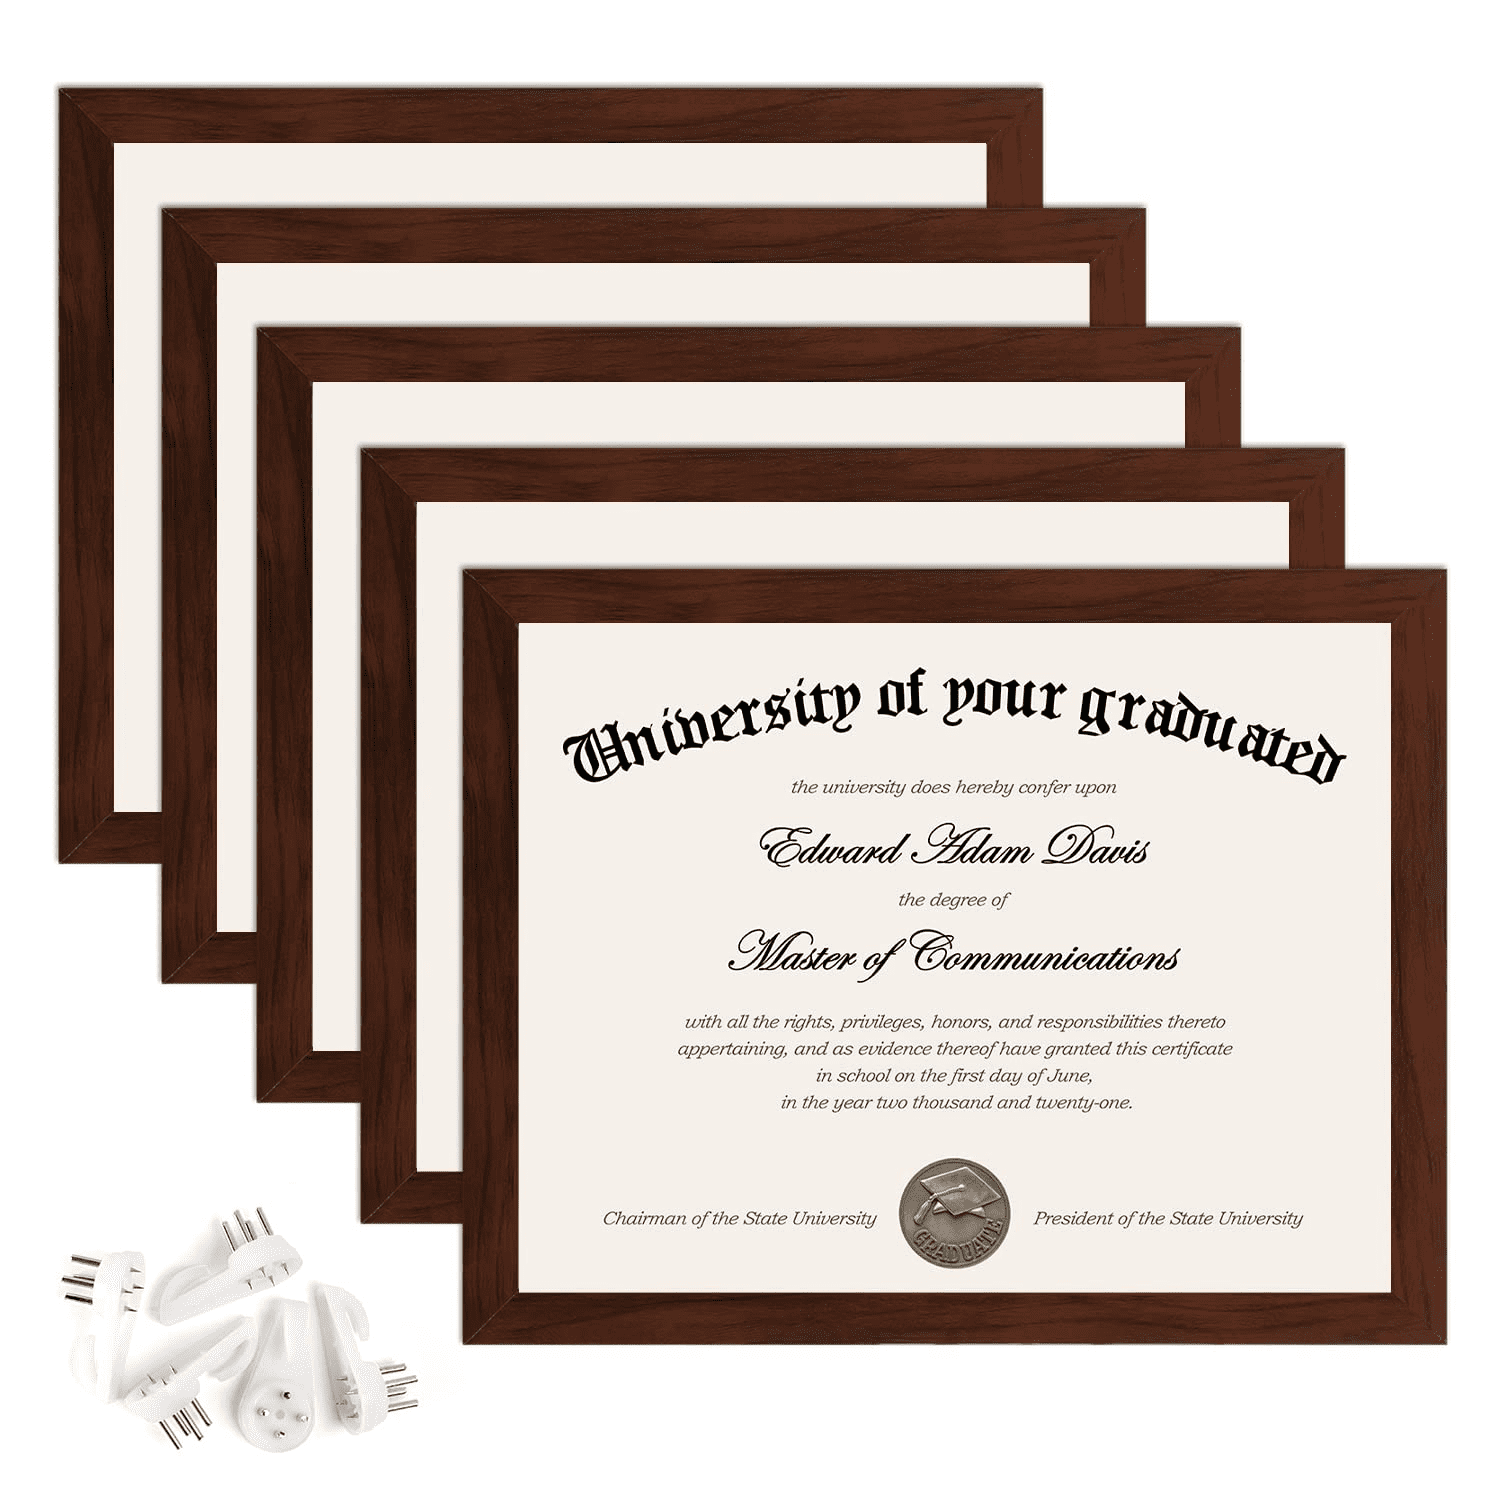 Single 8.5" x 11" Mahogany Document and Diploma Picture Frame in Black Color 